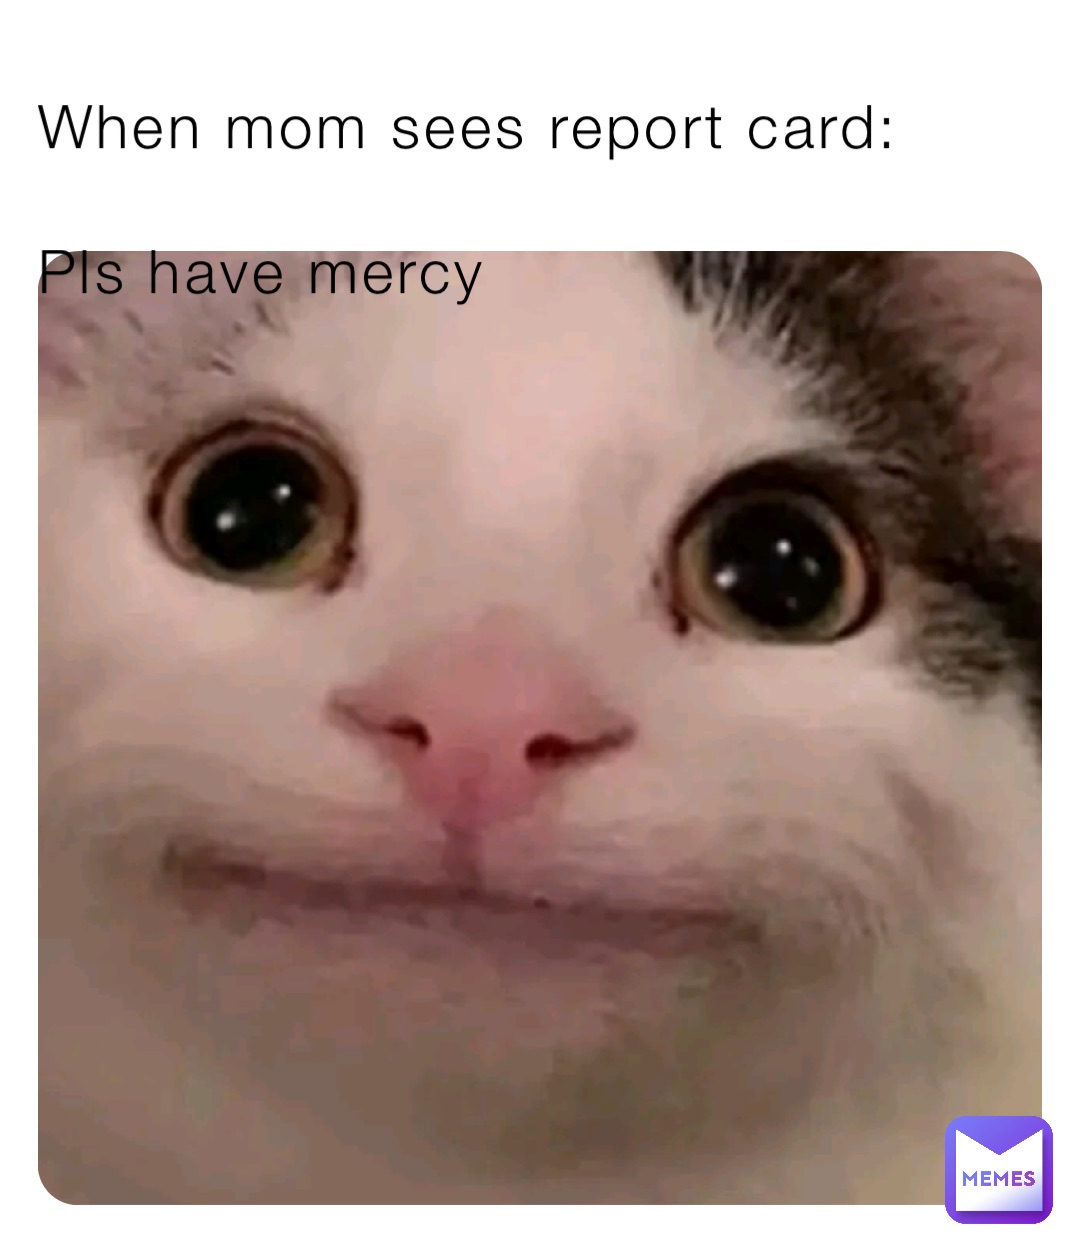 When mom sees report card:

Pls have mercy